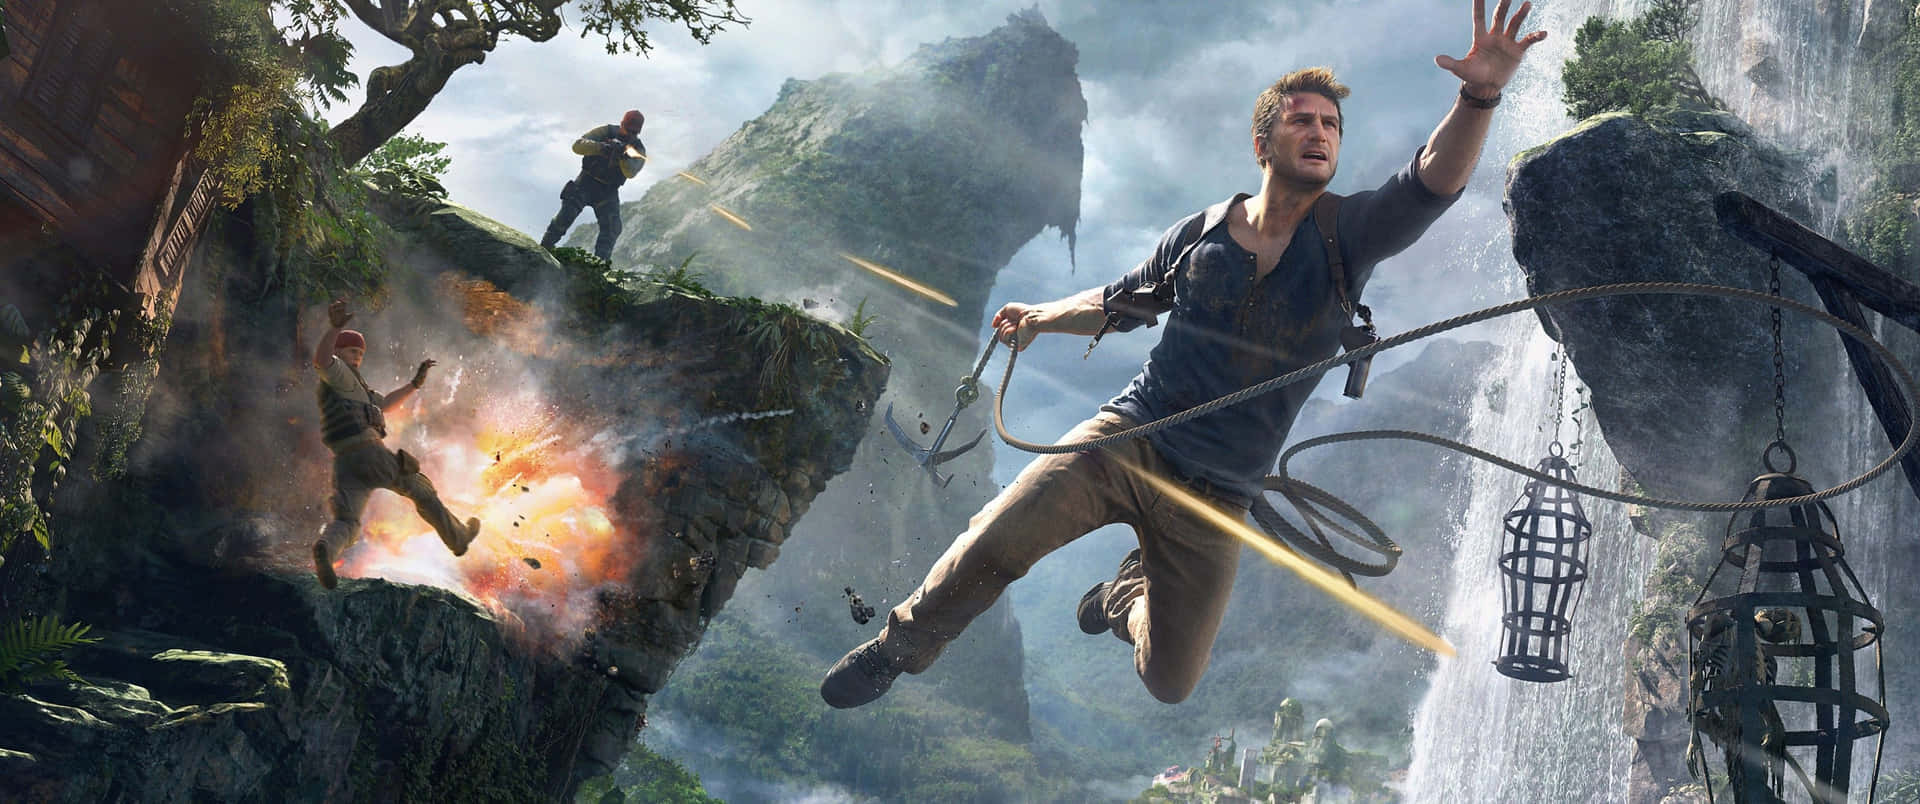 3440x1440 Game Uncharted 4: A Thief's End Wallpaper